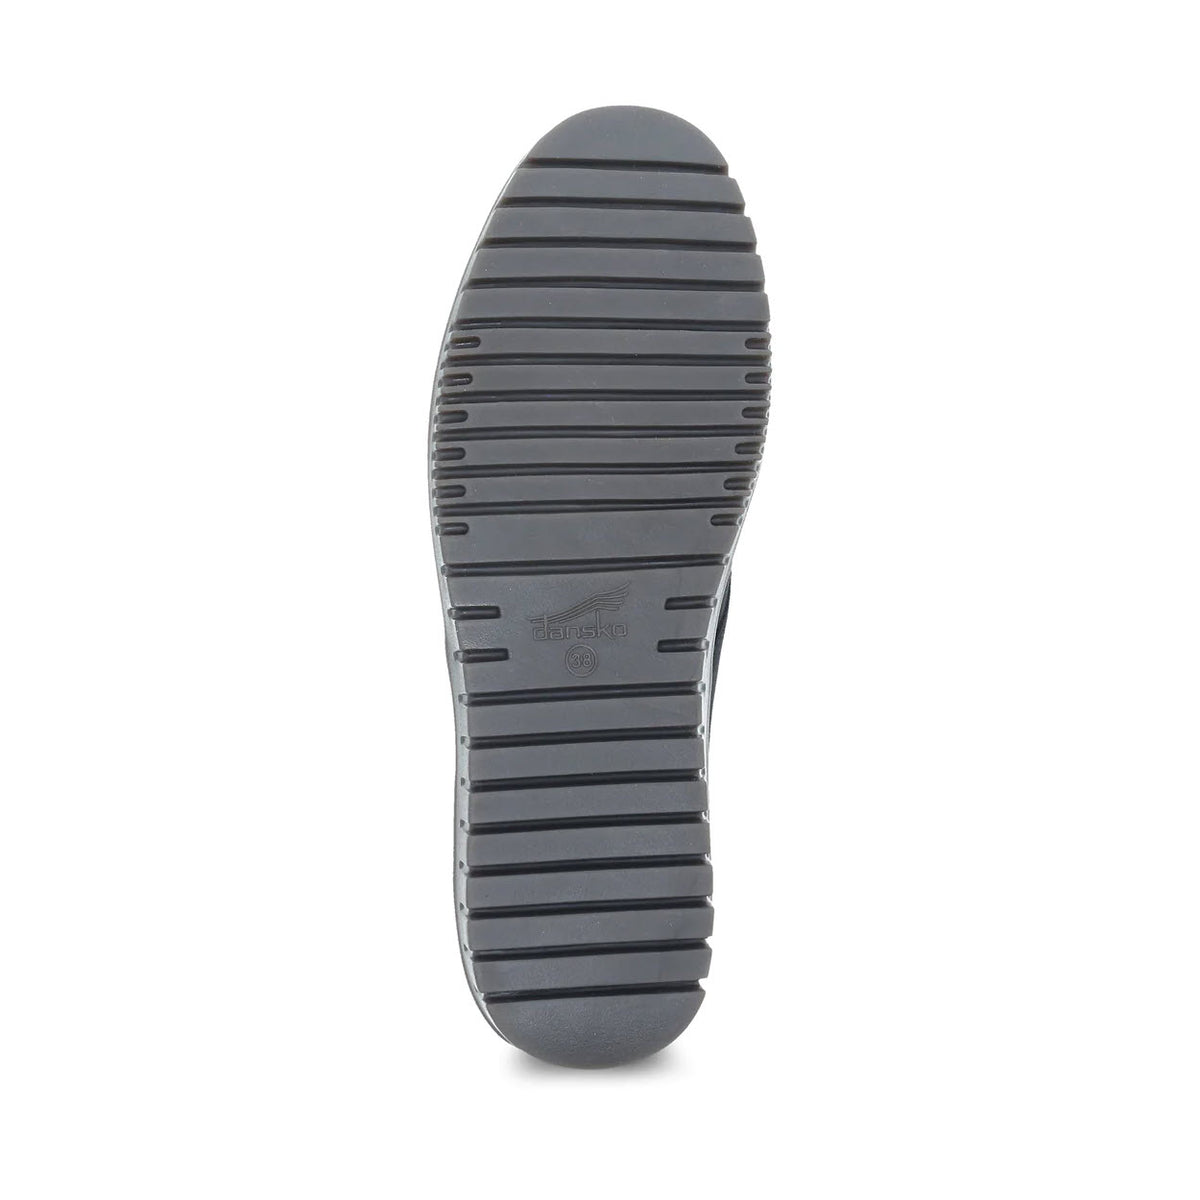 Dansko Libbie Black Burnished women&#39;s Oxford shoe sole with horizontal grooves and embossed Dansko brand logo, displayed against a white background.